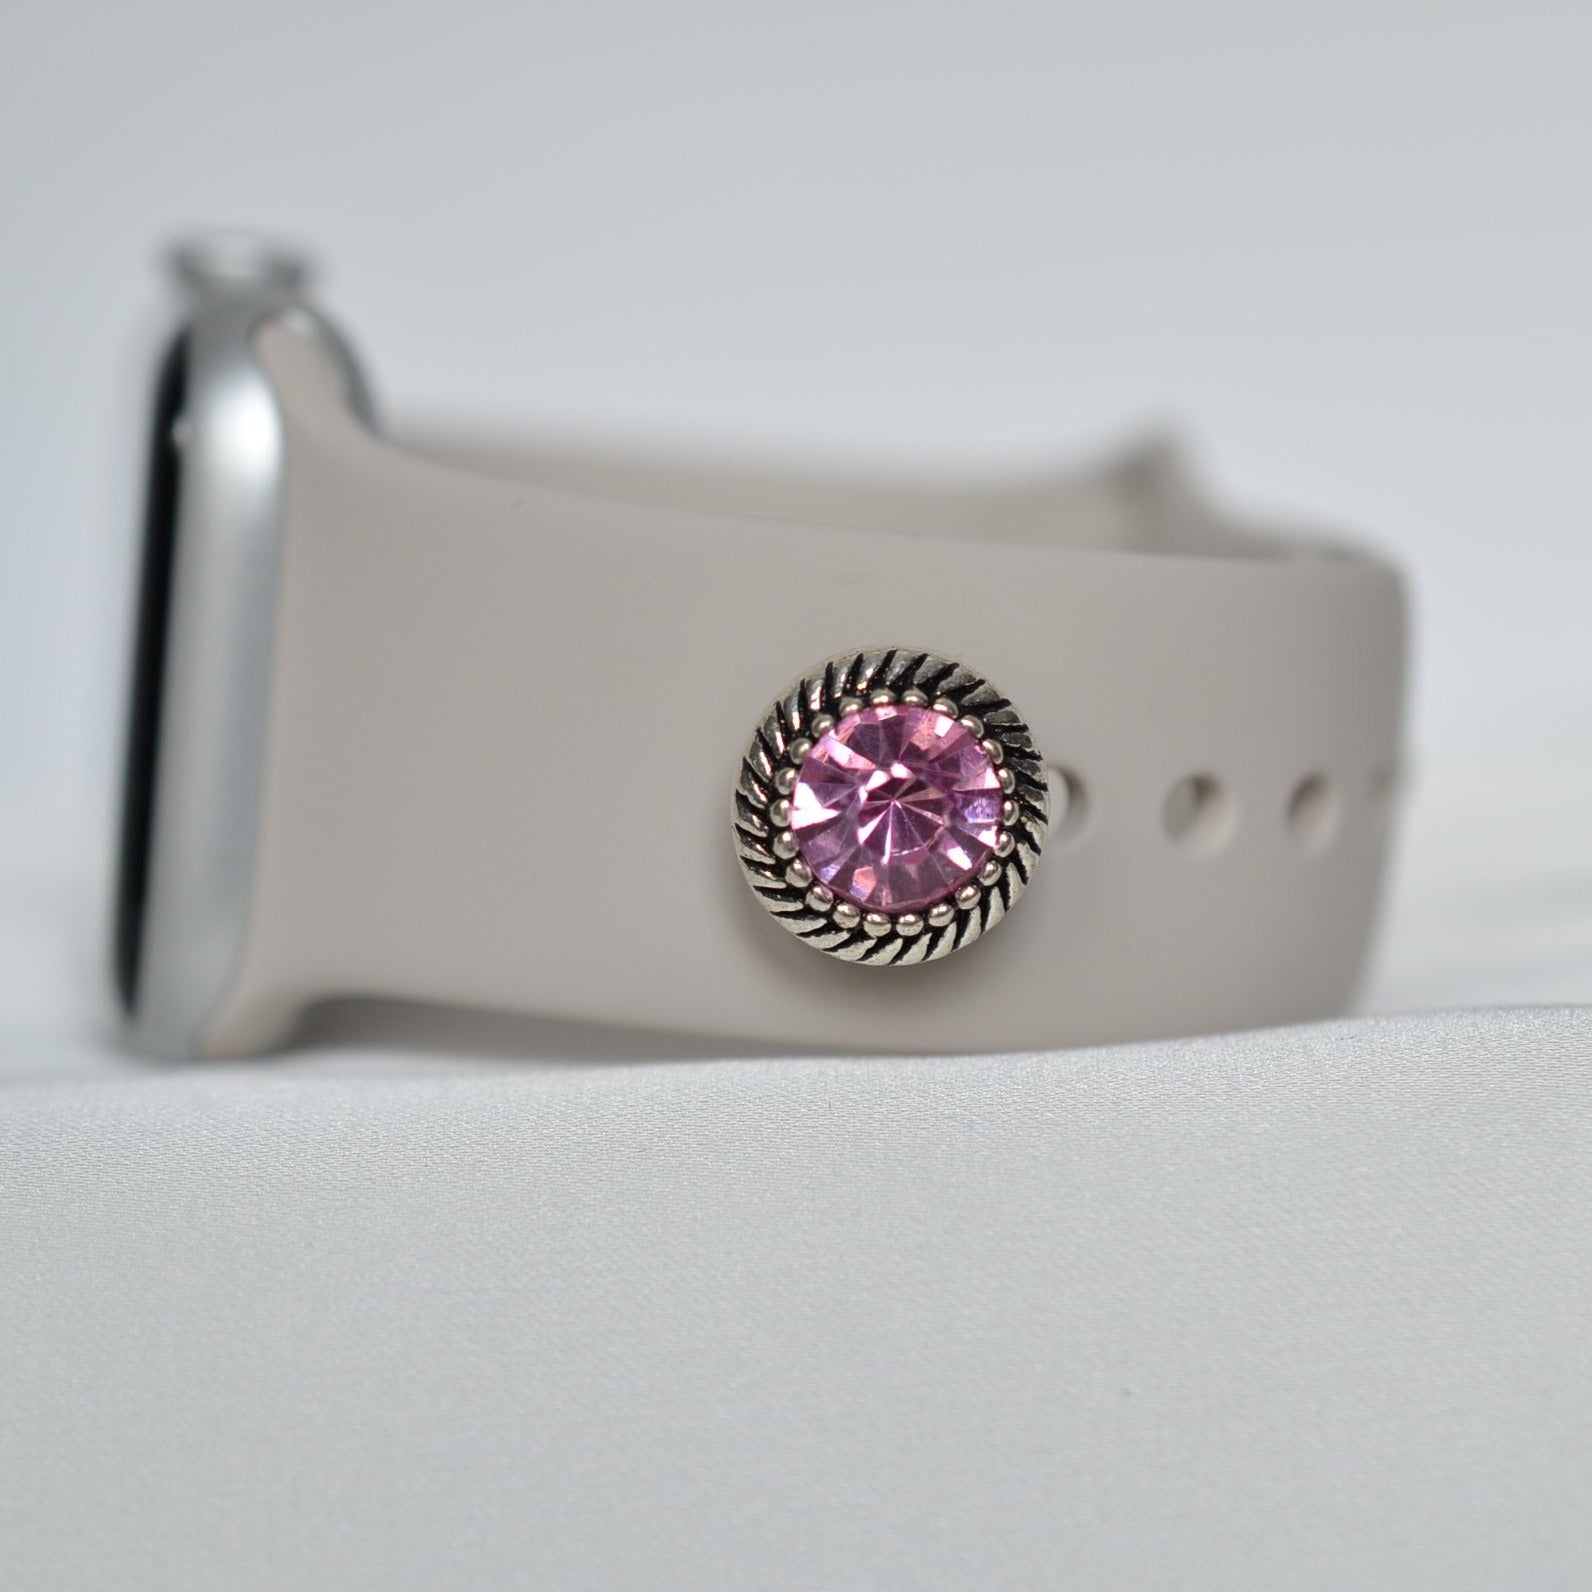 Pink Stone Charm for Belts, Bags and Watch Bands